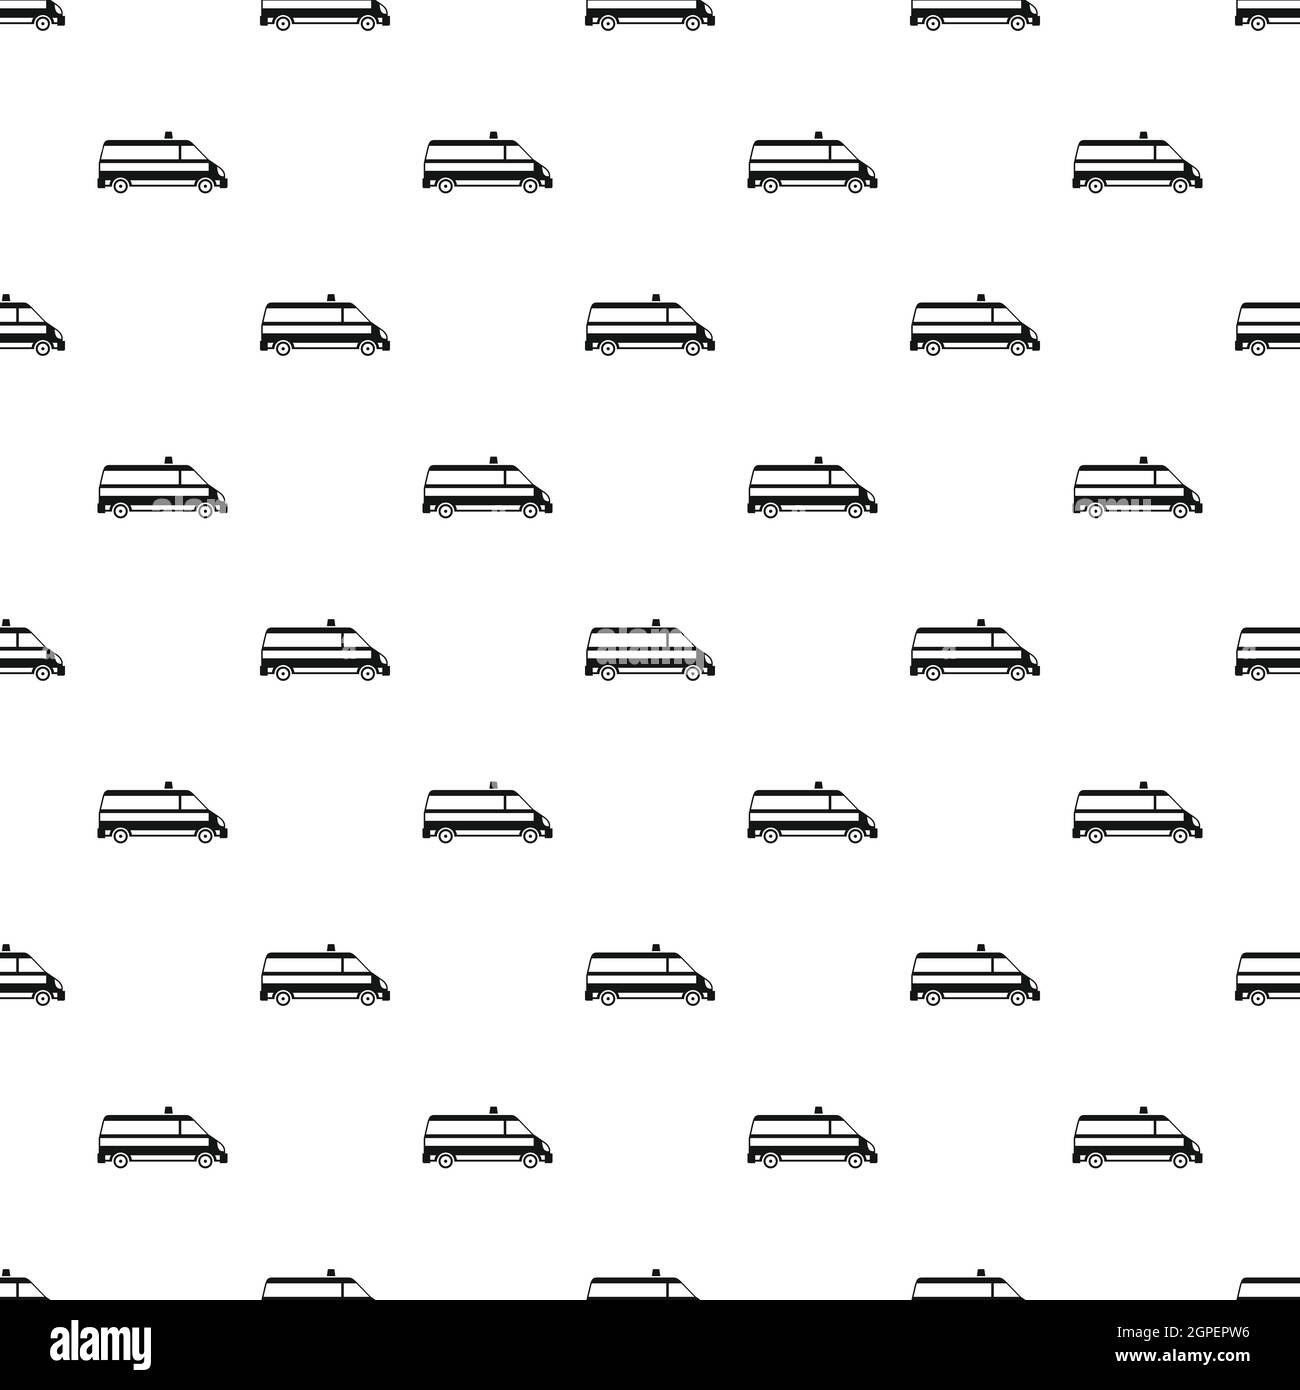 Ambulance car pattern, simple style Stock Vector